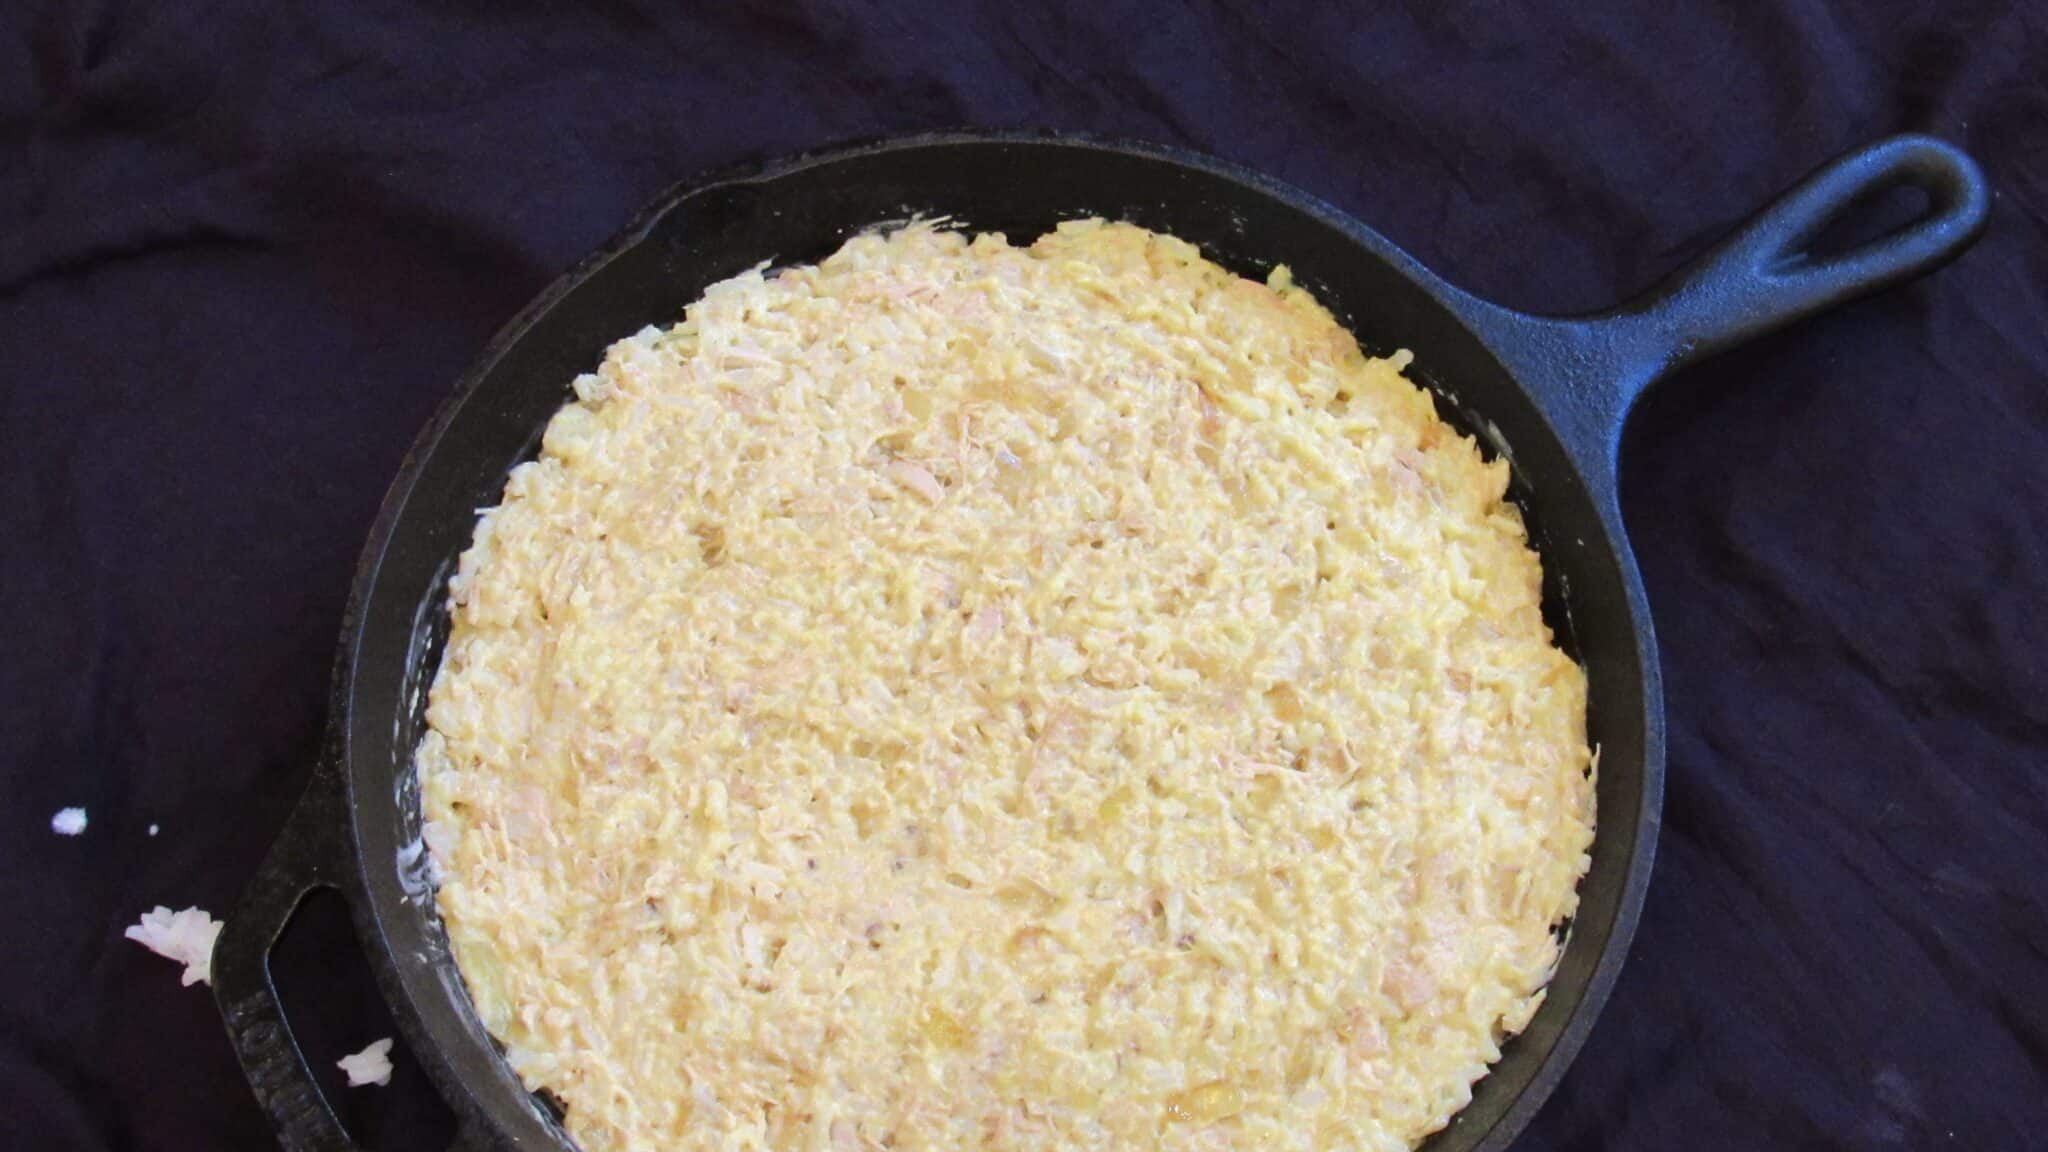  yellow rice and chicken casserole prepared in a cast-iron skillet and ready to bake.